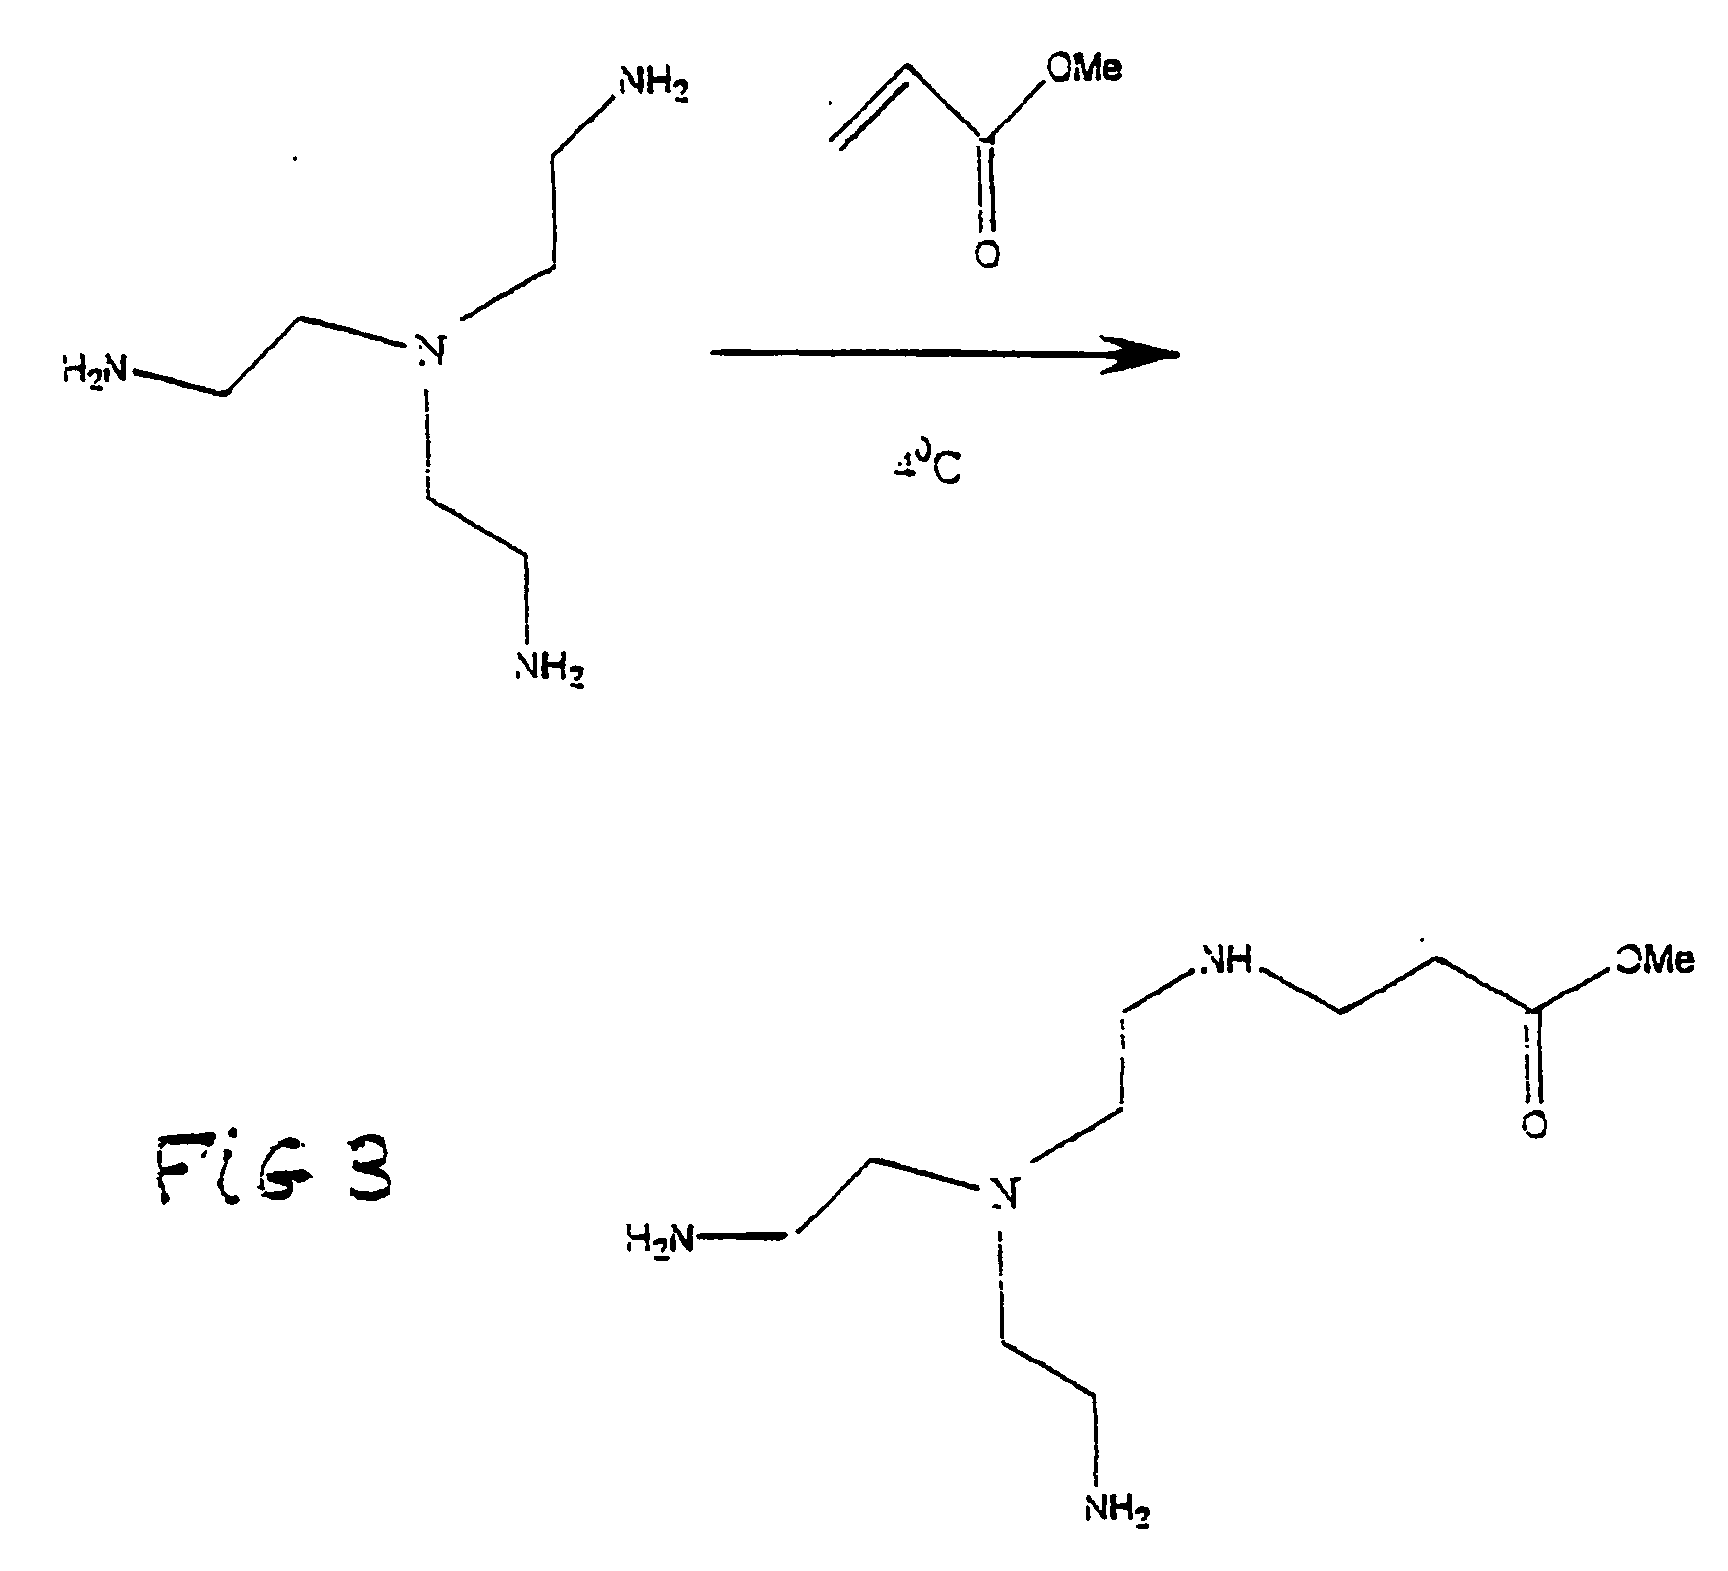 Hyperbranched (pamam) polymers via a one pot process